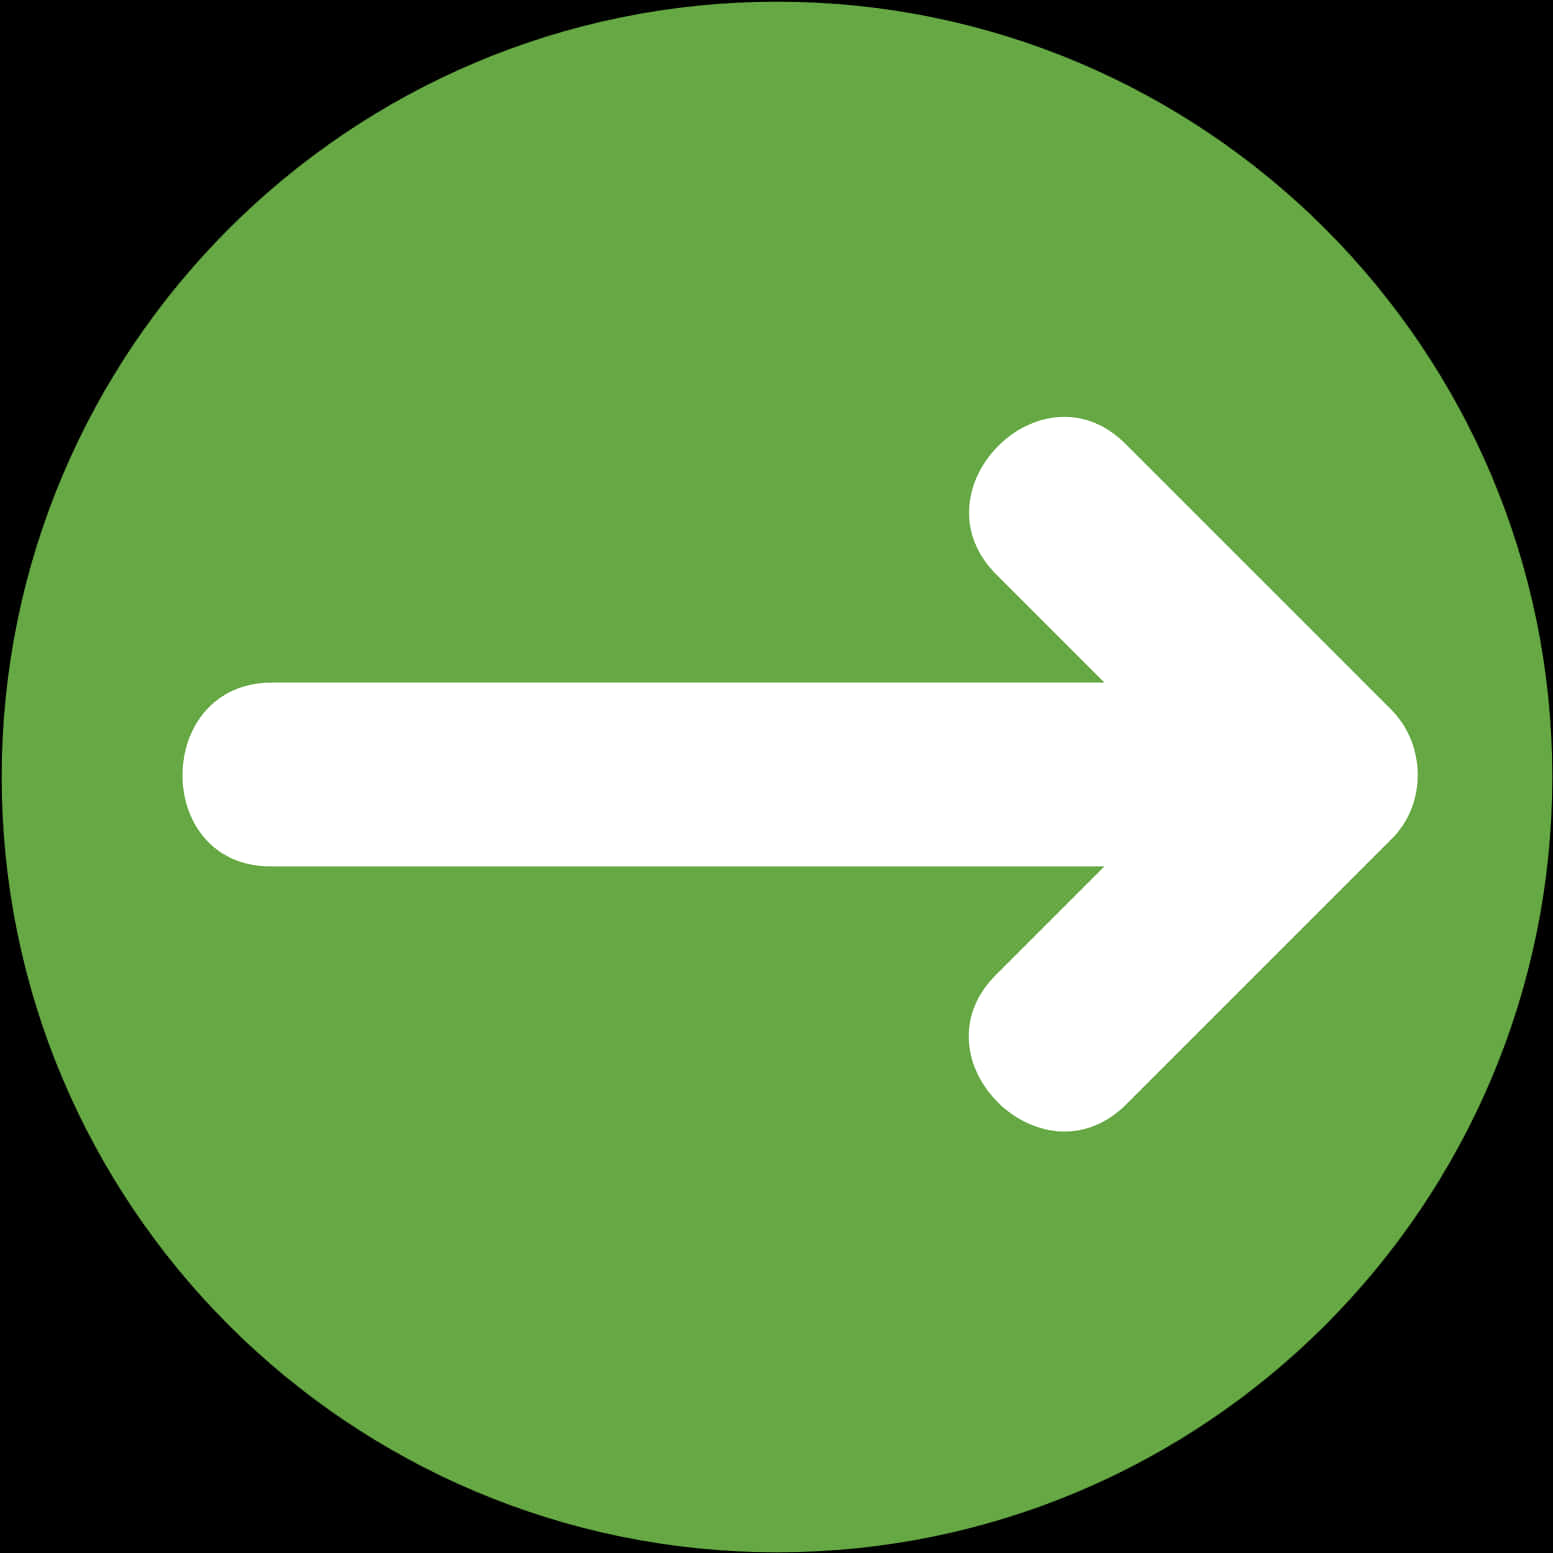 Right Arrow Icon Green Background PNG image